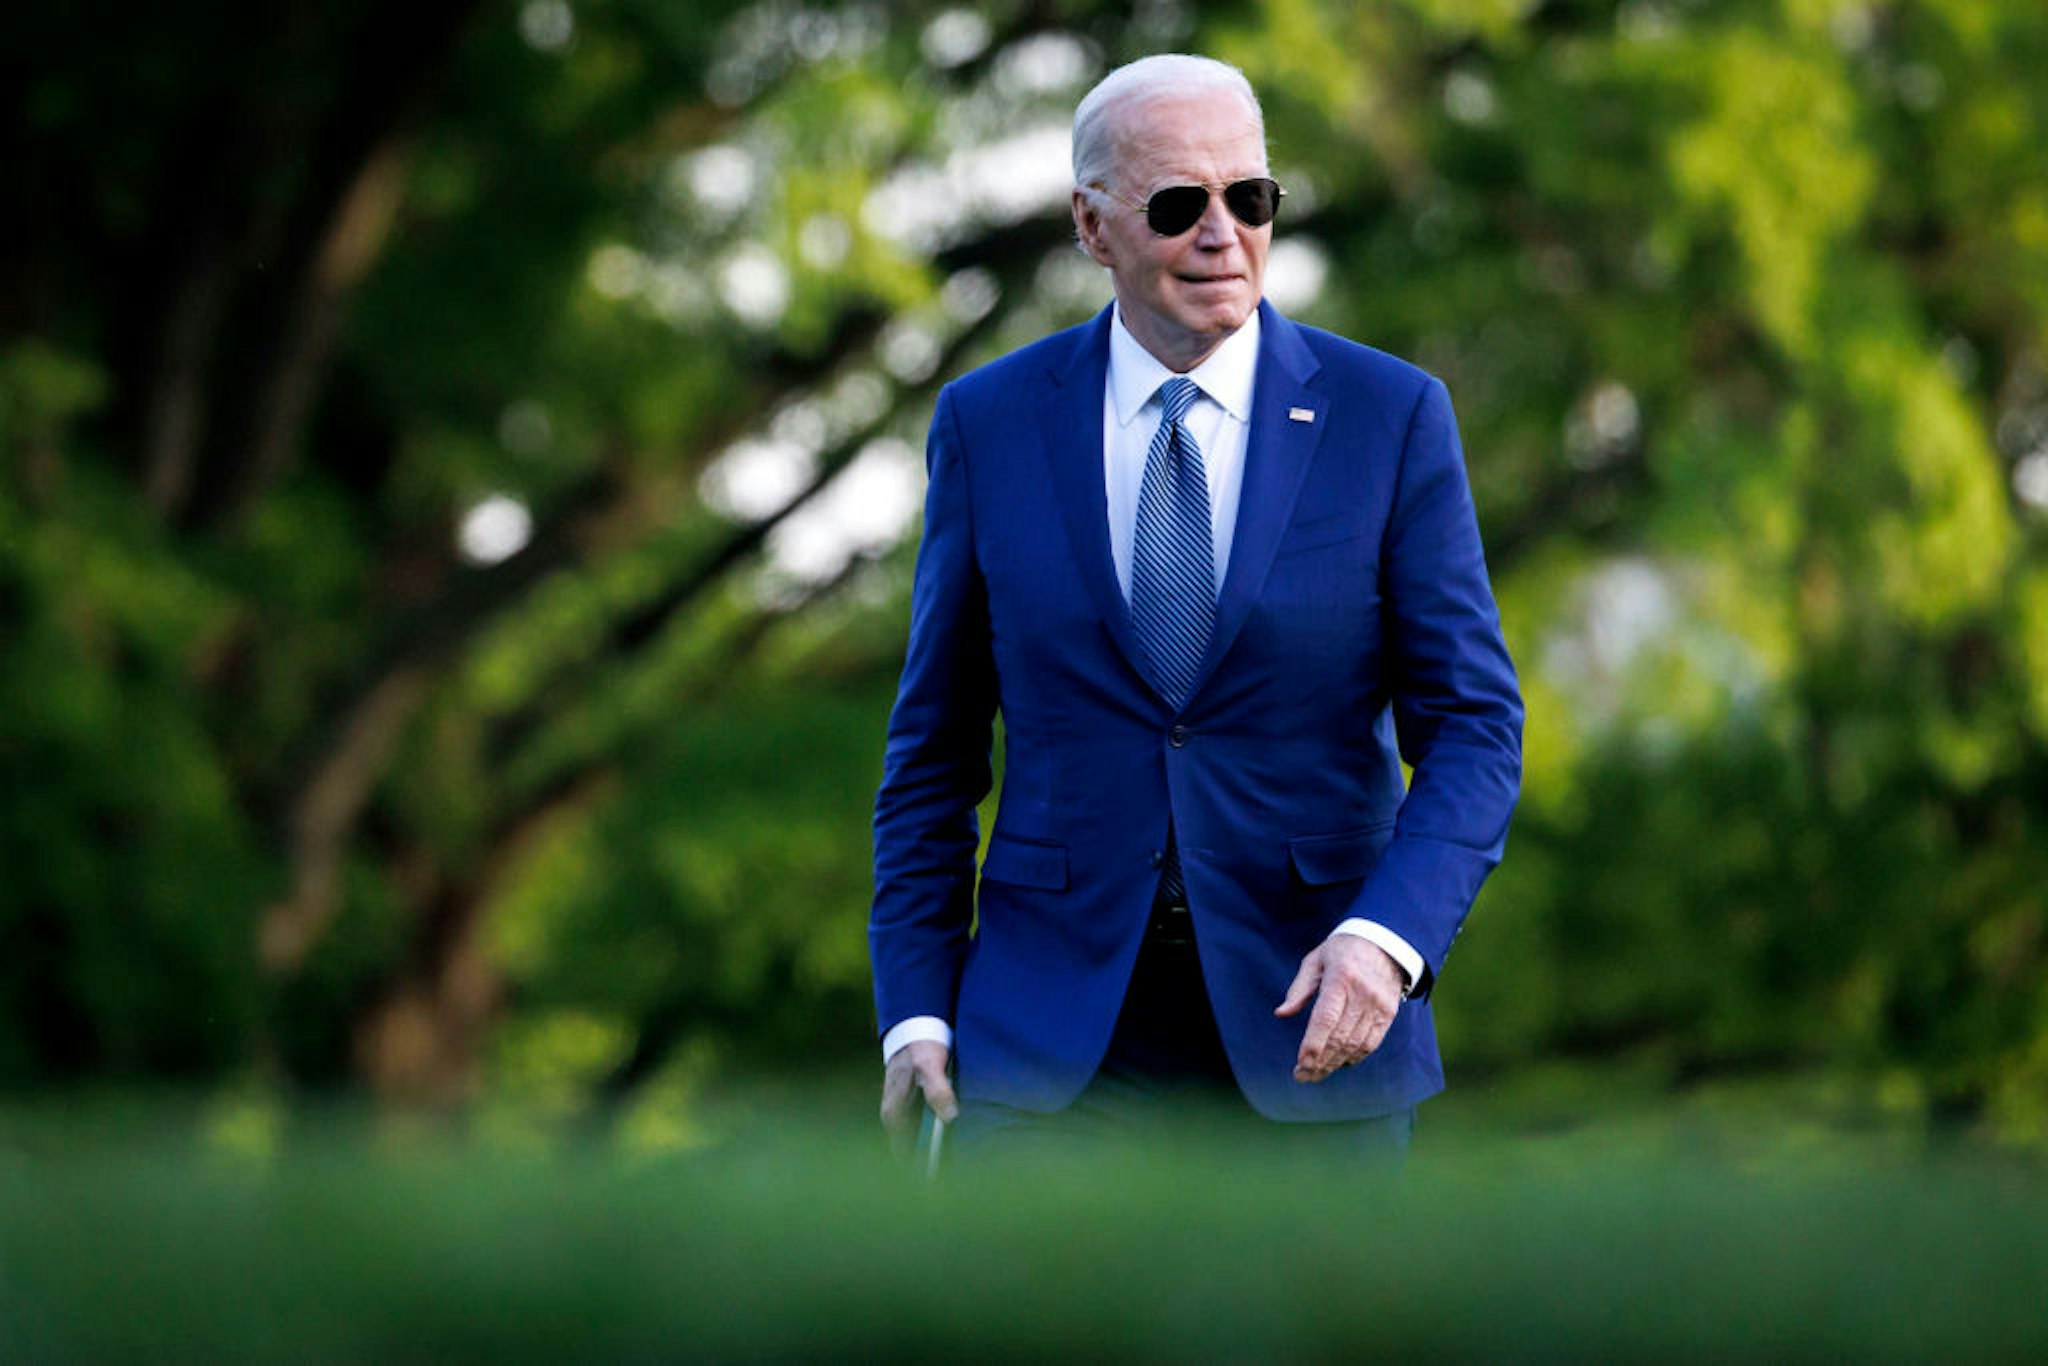 US President Joe Biden walks on the South Lawn of the White House after arriving on Marine One in Washington, DC, US, on Tuesday, April 23, 2024. The White House is set to announce $1 billion in fresh military aid for Ukraine including 155mm artillery shells and air-defense munitions, two administration officials said, as the US looks to act quickly once a long-delayed supplemental funding request becomes law. Photographer: Ting Shen/Bloomberg via Getty Images